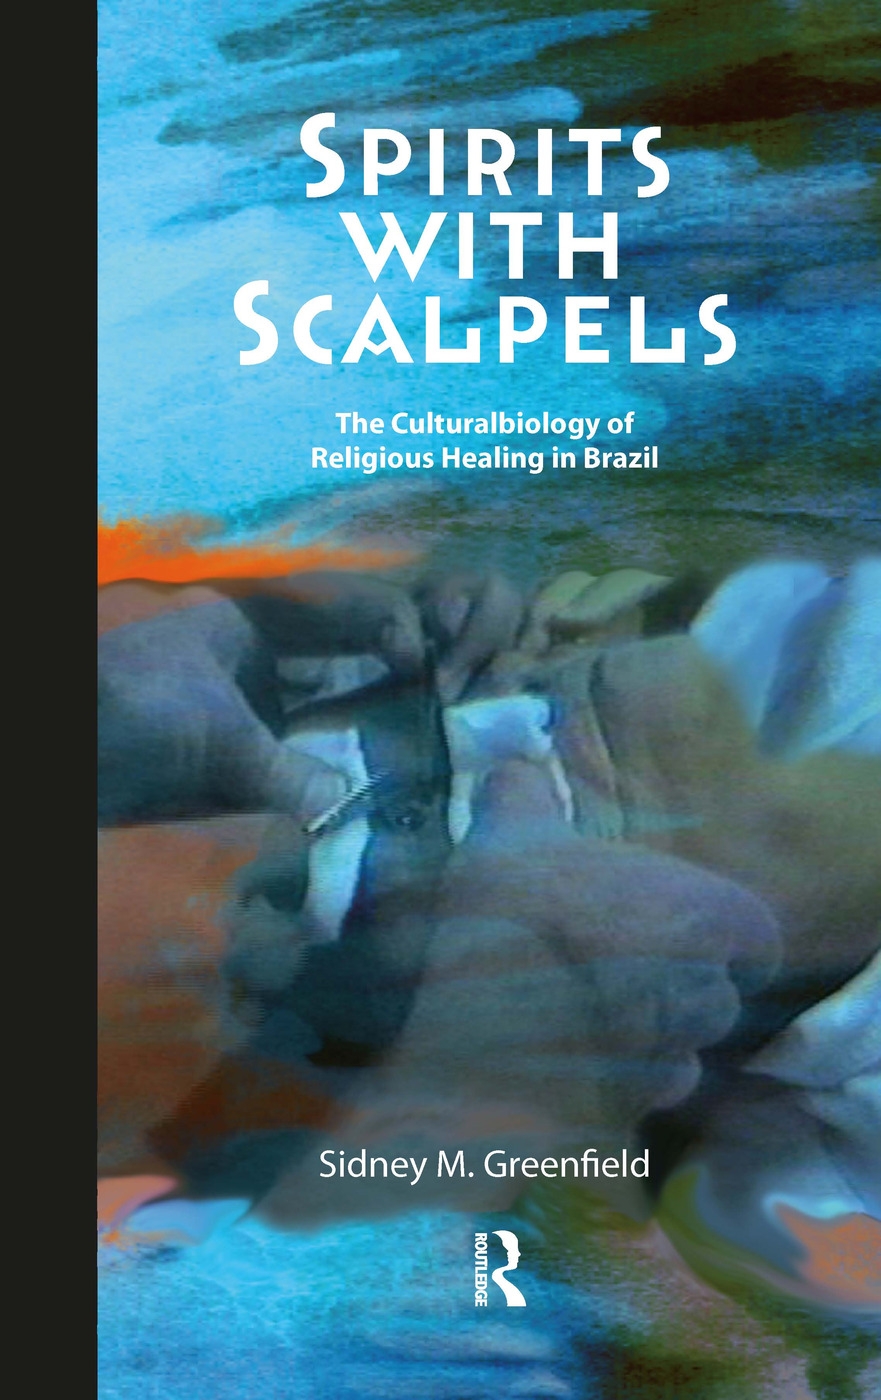 Spirits with Scalpels: The Cultural Biology of Religious Healing in Brazil